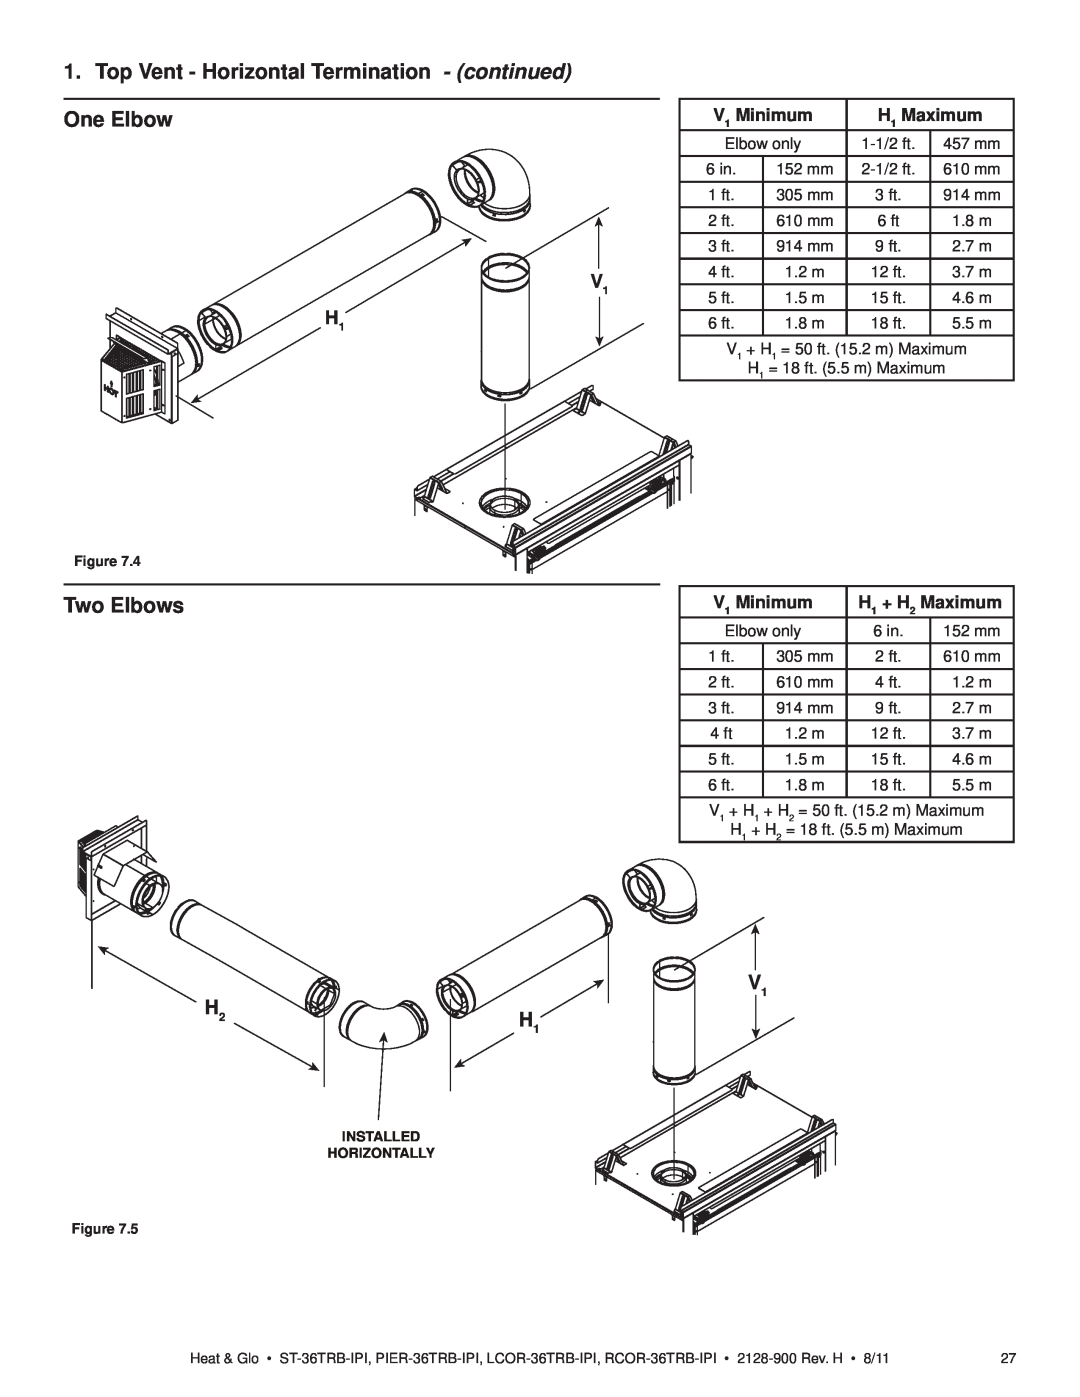 Heat & Glo LifeStyle ST-36TRB-IPI owner manual Top Vent - Horizontal Termination - continued, One Elbow, Two Elbows 